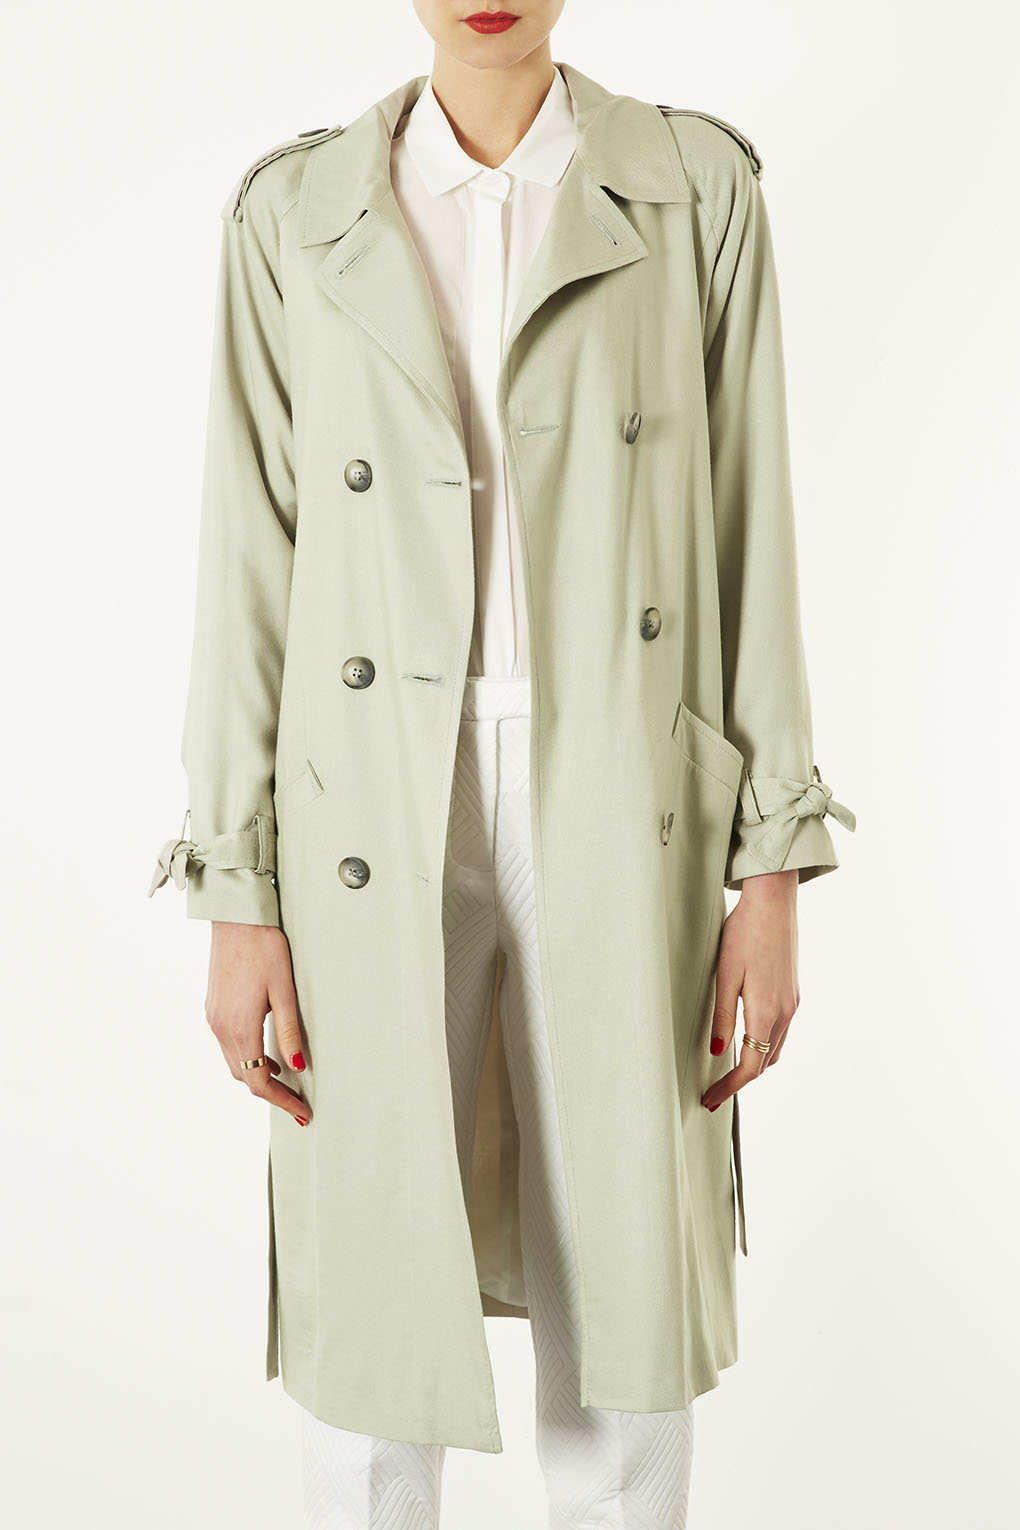 TOPSHOP Soft Trench Coat in Green - Lyst